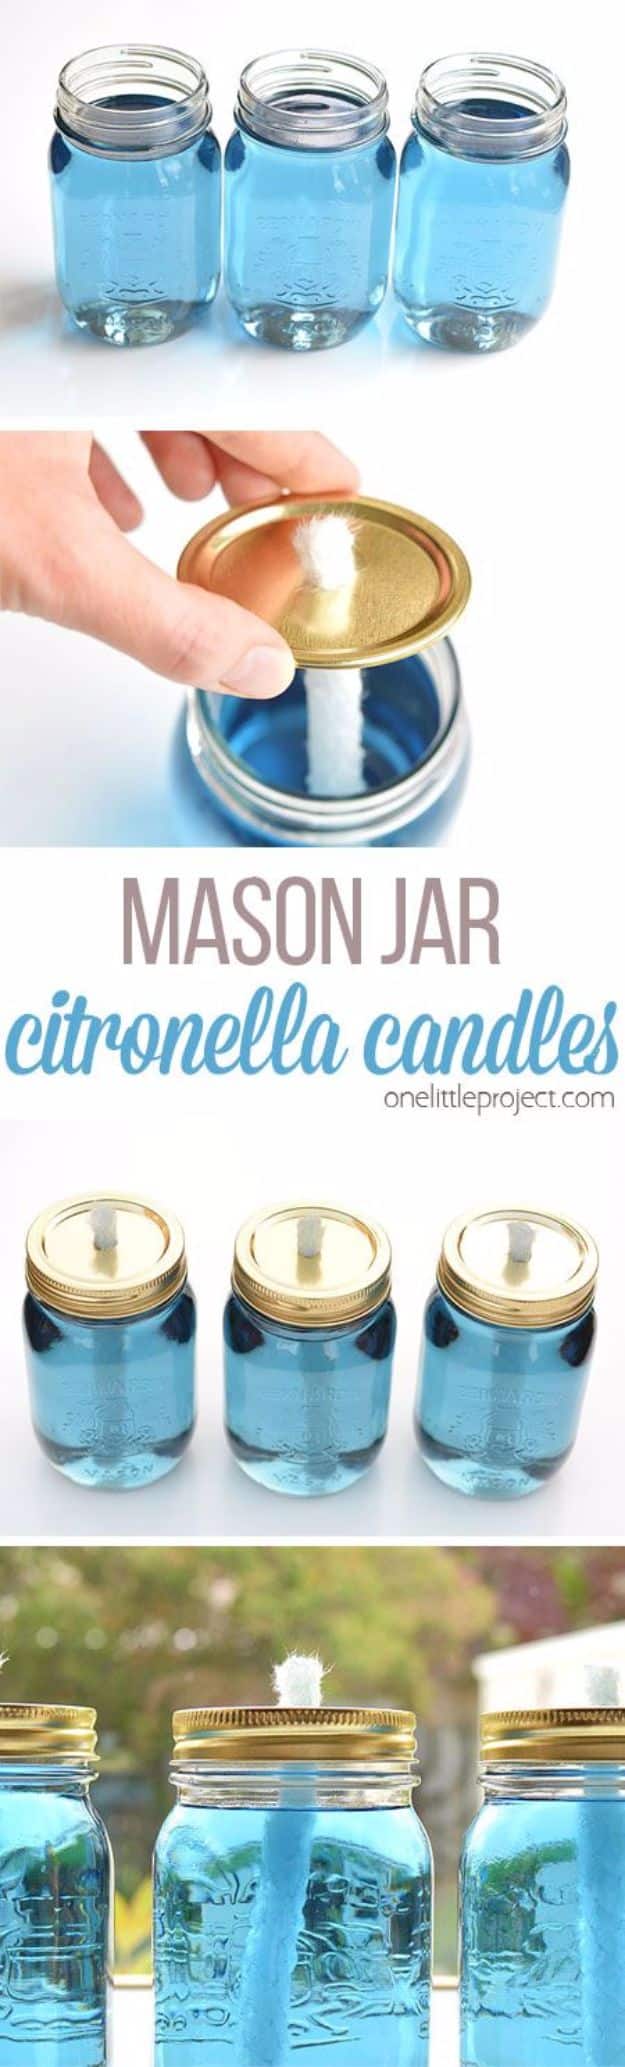 DIY Camping Hacks - Mason Jar Citronella Candles - Easy Tips and Tricks, Recipes for Camping - Gear Ideas, Cheap Camping Supplies, Tutorials for Making Quick Camping Food, Fire Starters, Gear Holders and More 